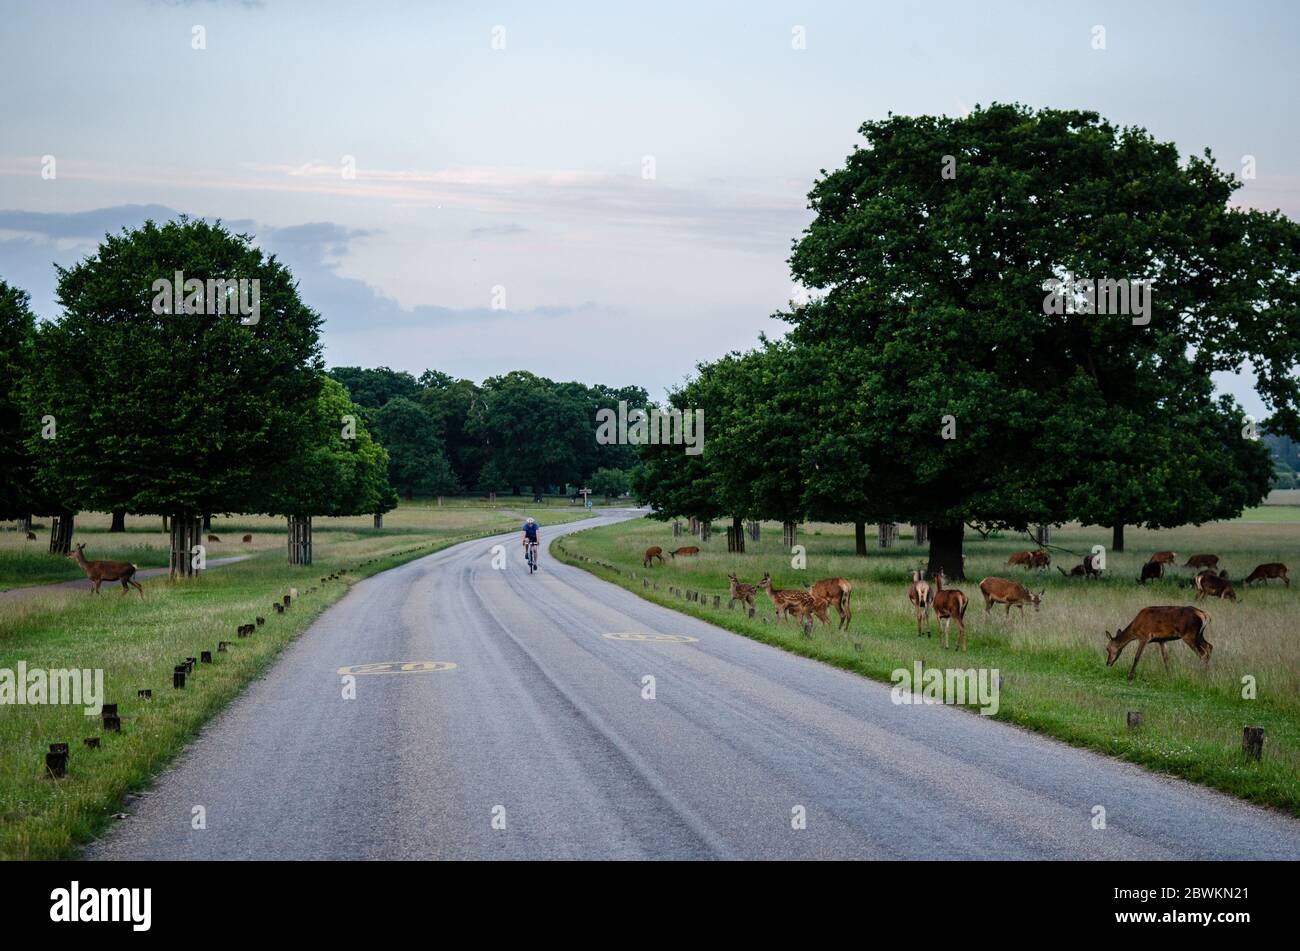 London, England, UK - July 1, 2013: A cyclist rides past a herd of grazing deer in Richmond Park in southwest London. Stock Photo